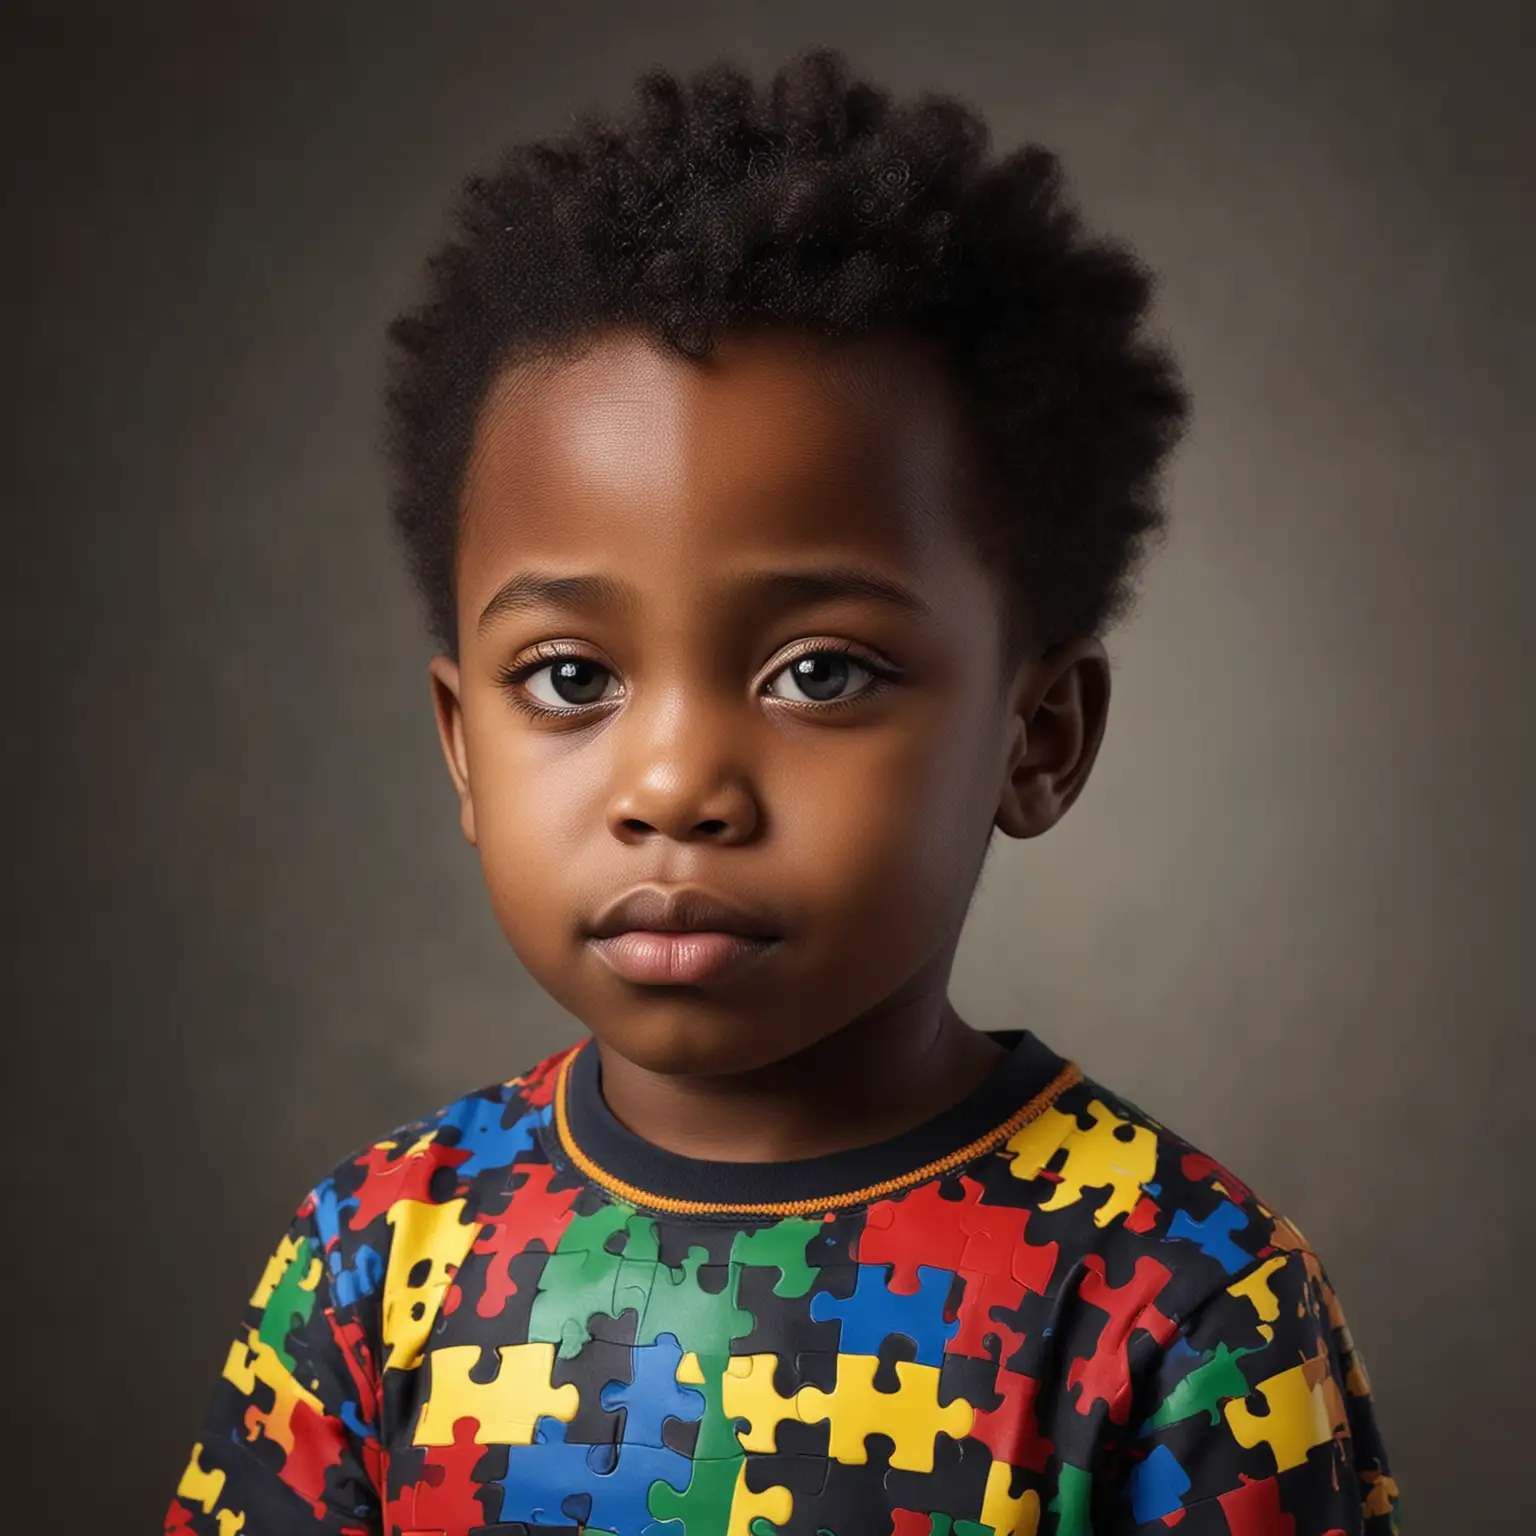 Empowering Black Child with Autism Understanding and Support